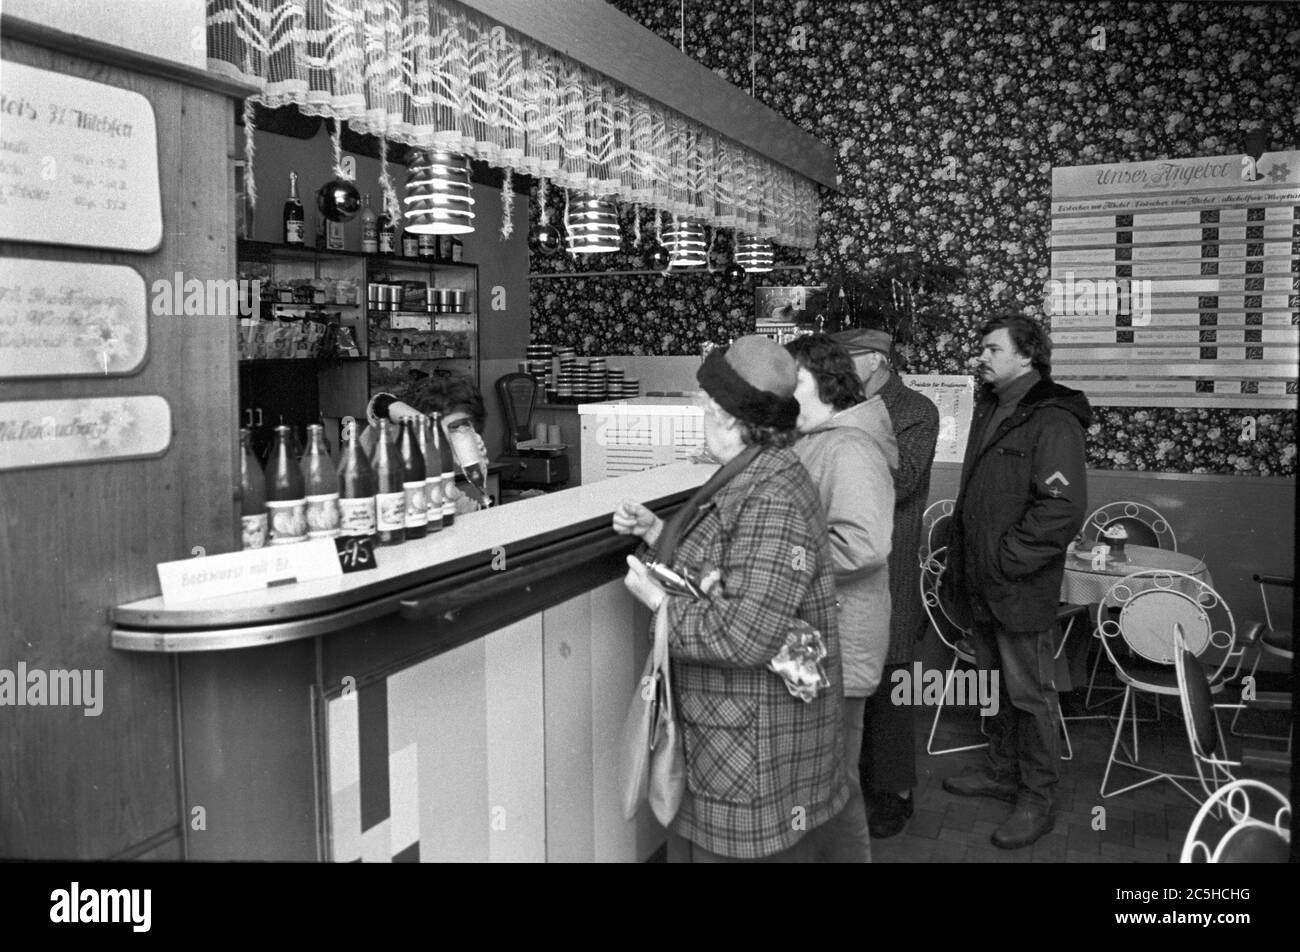 30 November 1986, Saxony, Eilenburg: People wait at the counter in an ice bar in Eilenburg in the mid-1980s for what has been ordered. Exact date of recording not known. Photo: Volkmar Heinz/dpa-Zentralbild/ZB Stock Photo